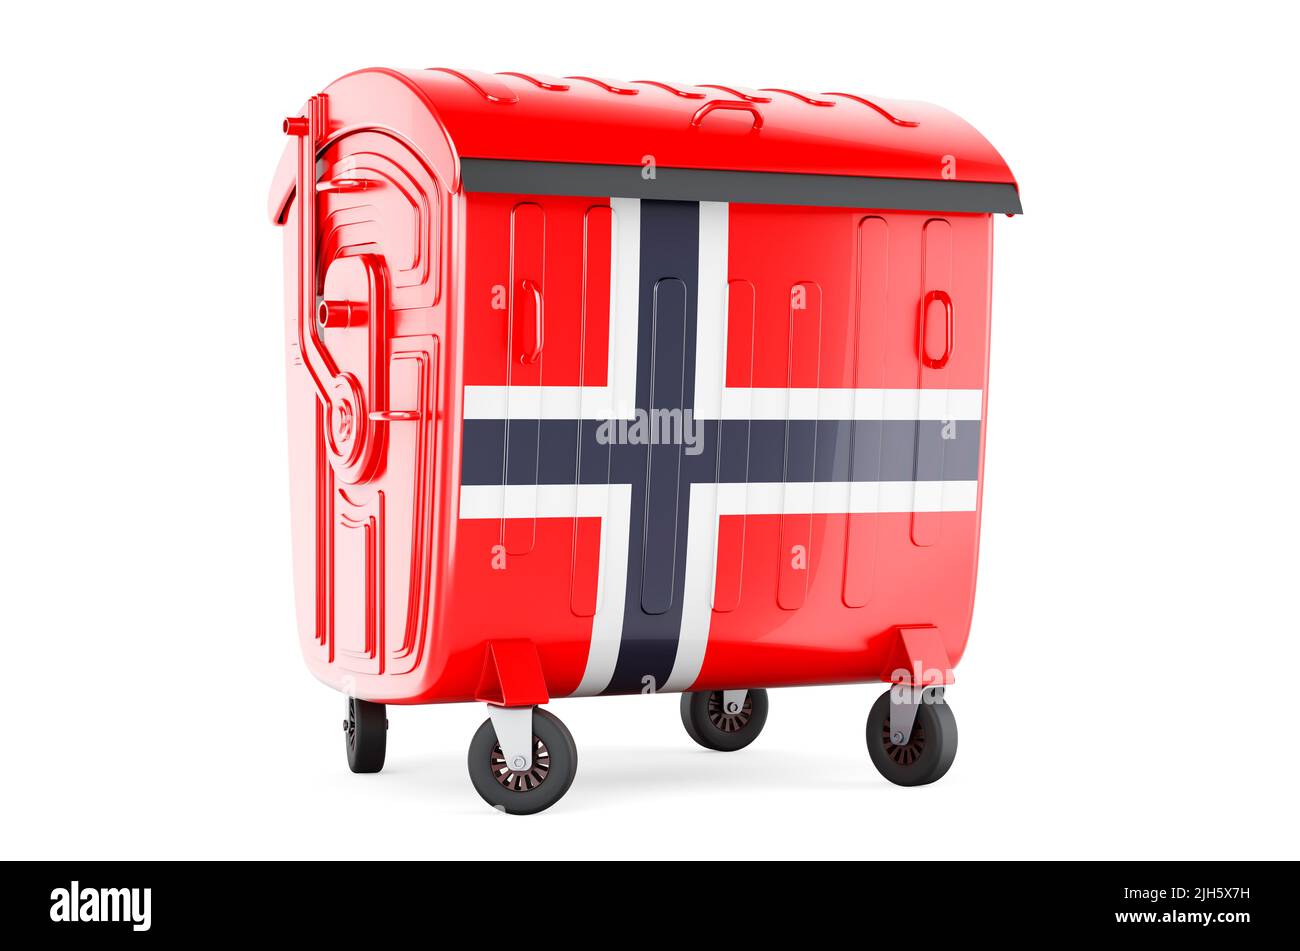 Garbage container with Norwegian flag, 3D rendering isolated on white background Stock Photo